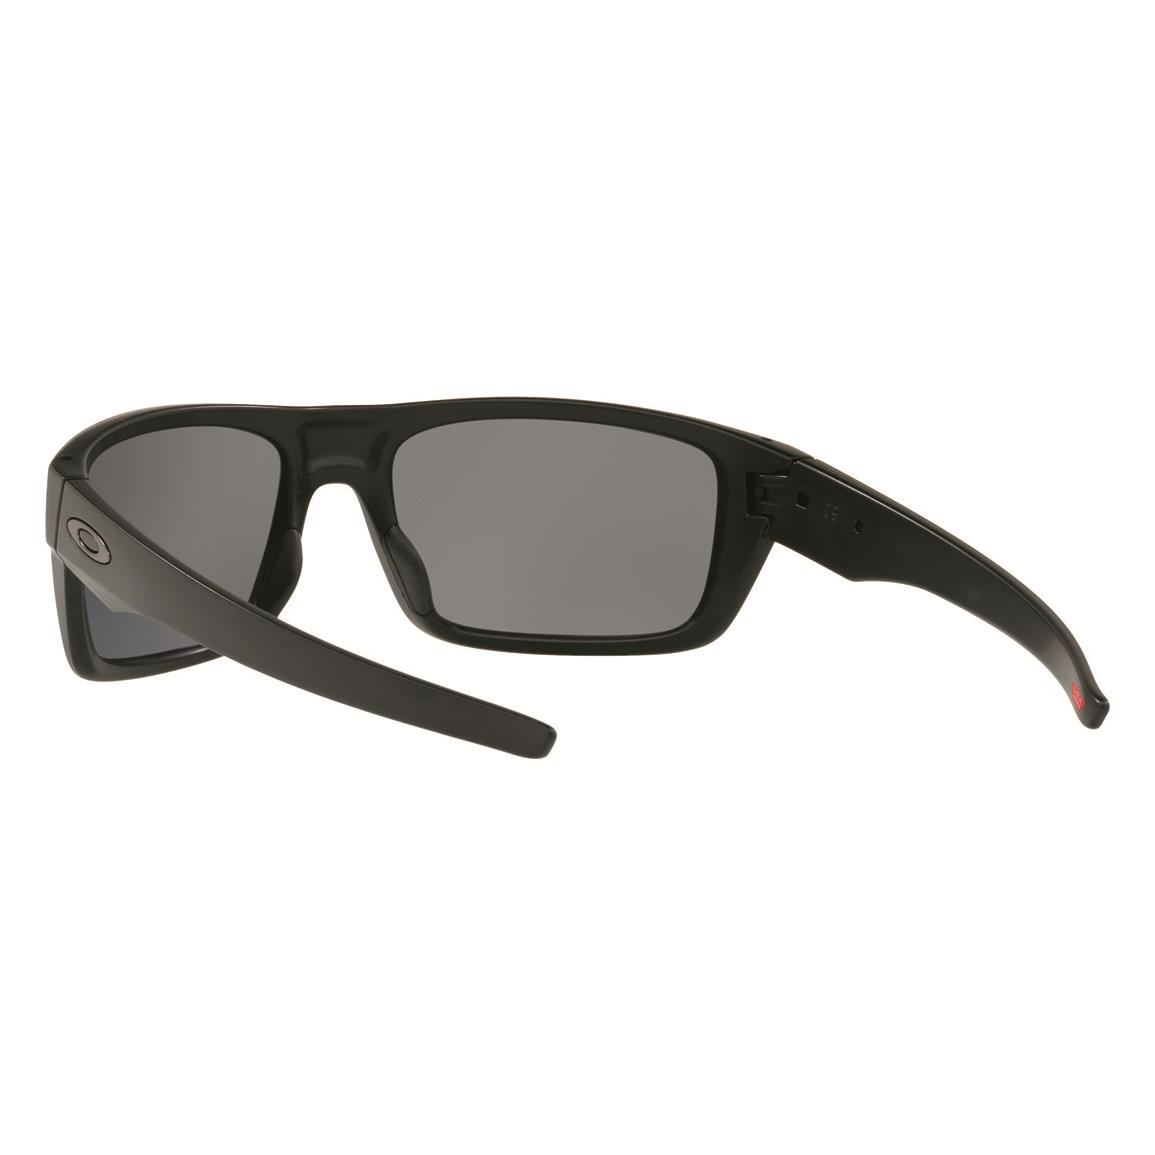 Oakley Men's Standard Issue Holbrook™ USA Flag Collection Sunglasses